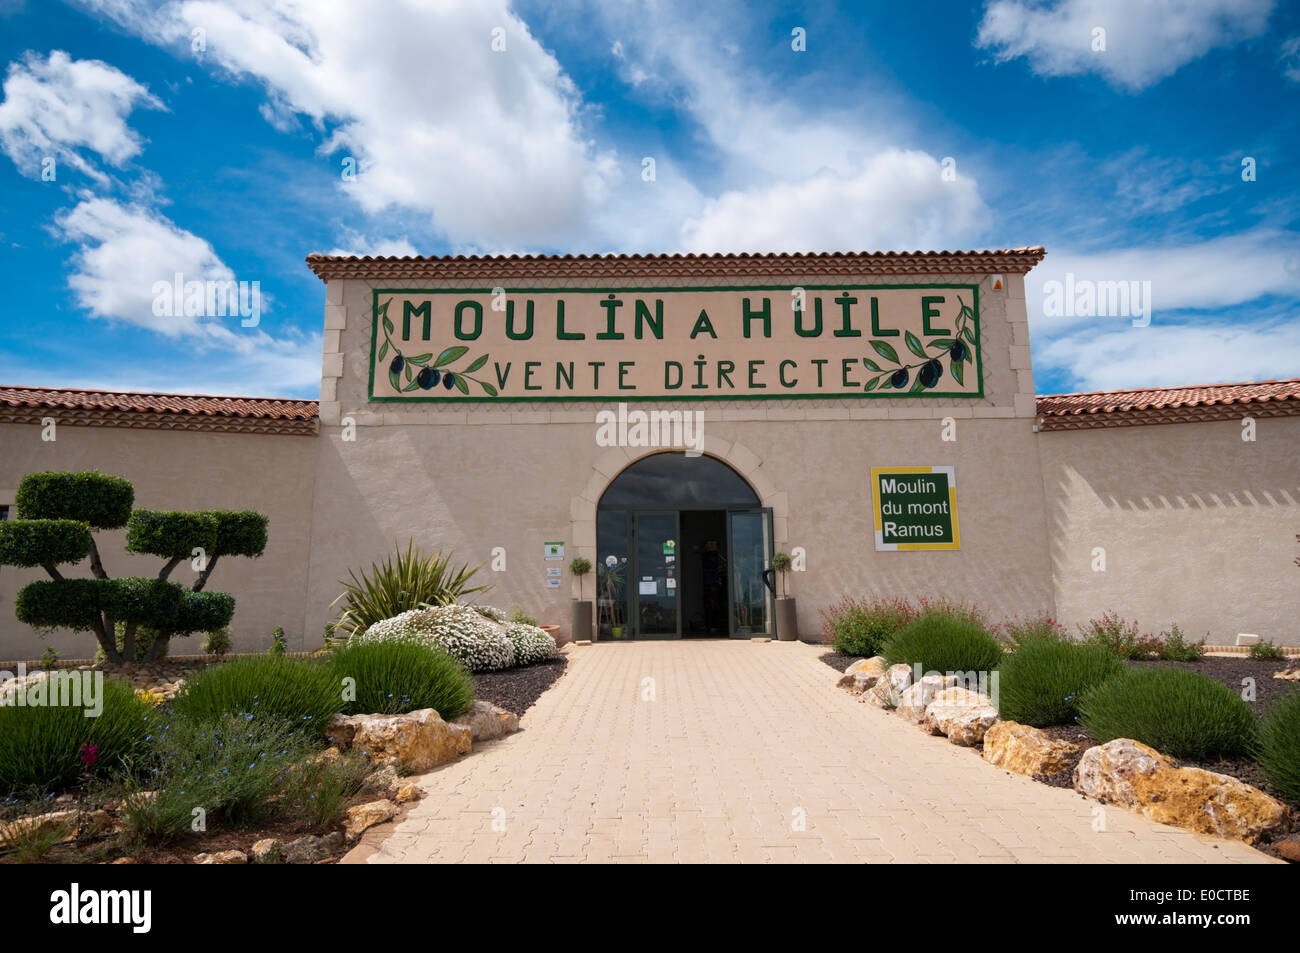 Moulin du Mont Ramus Olive Oil producers and sellers in Bessan, Languedoc, southern France. Stock Photo